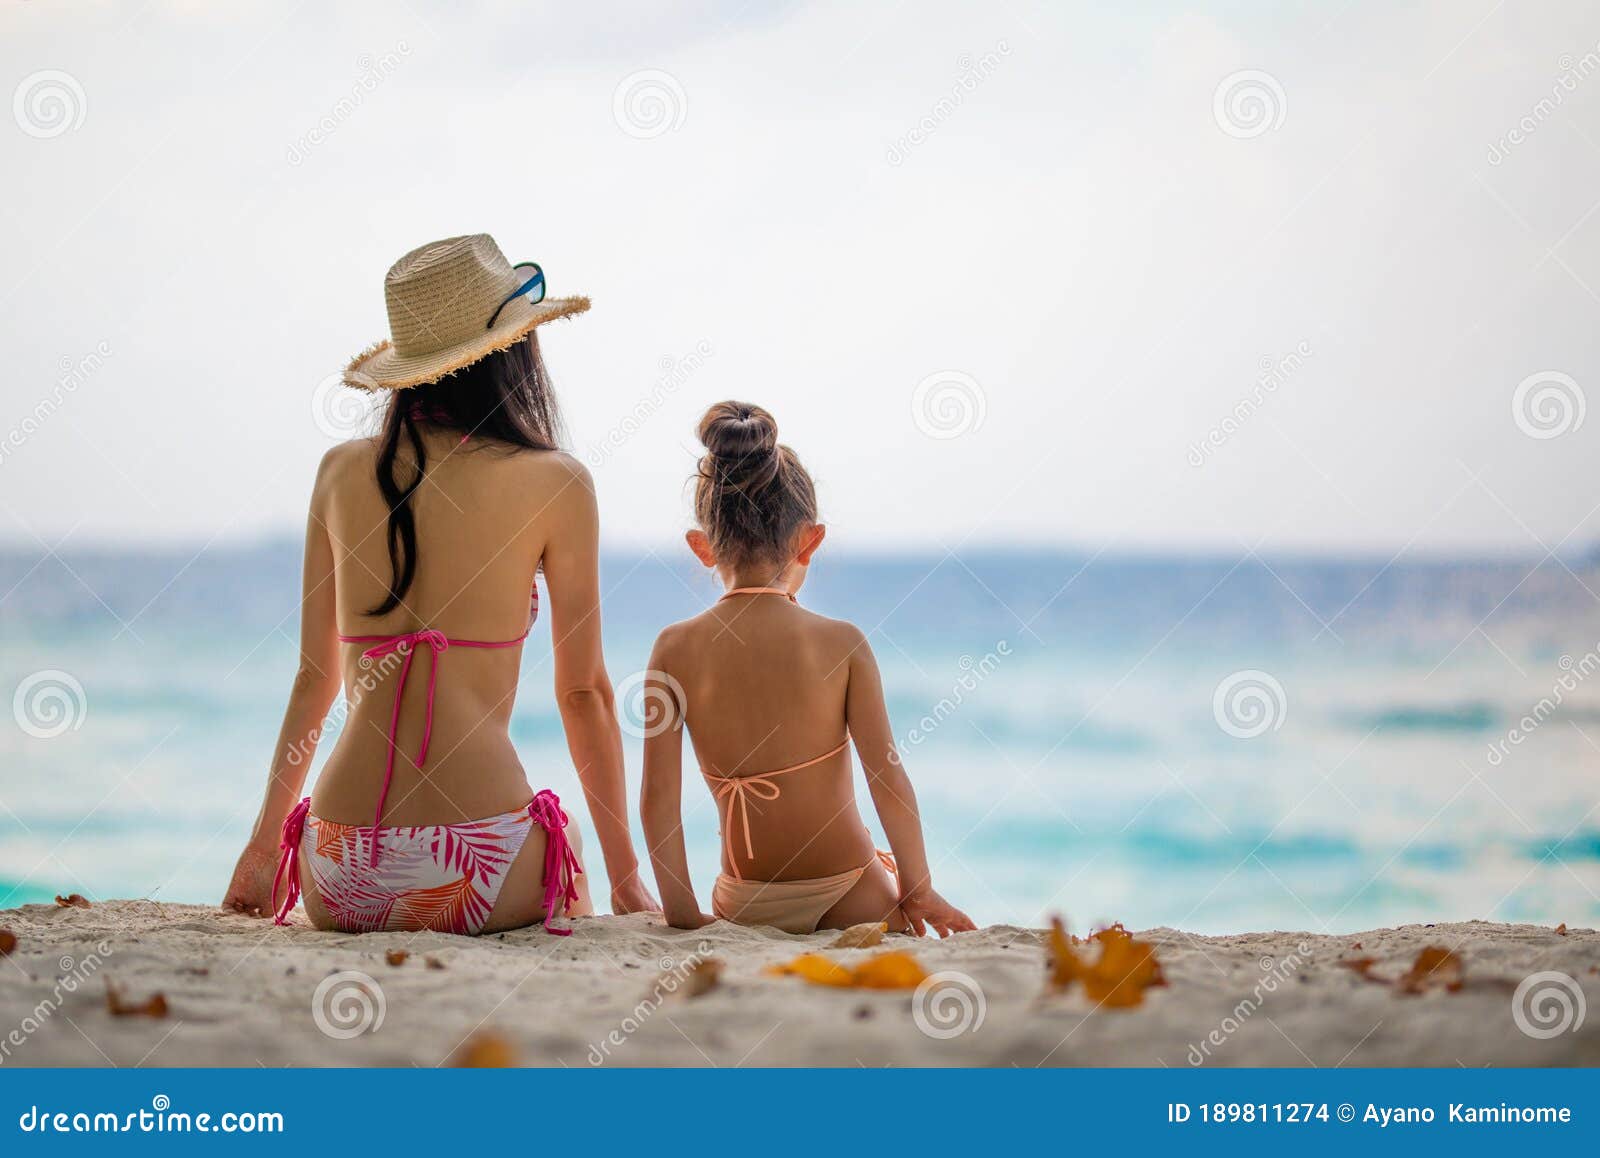 Mom and daughter swimming togther in bikinis 1 684 Mother Daughter Bikini Photos Free Royalty Free Stock Photos From Dreamstime